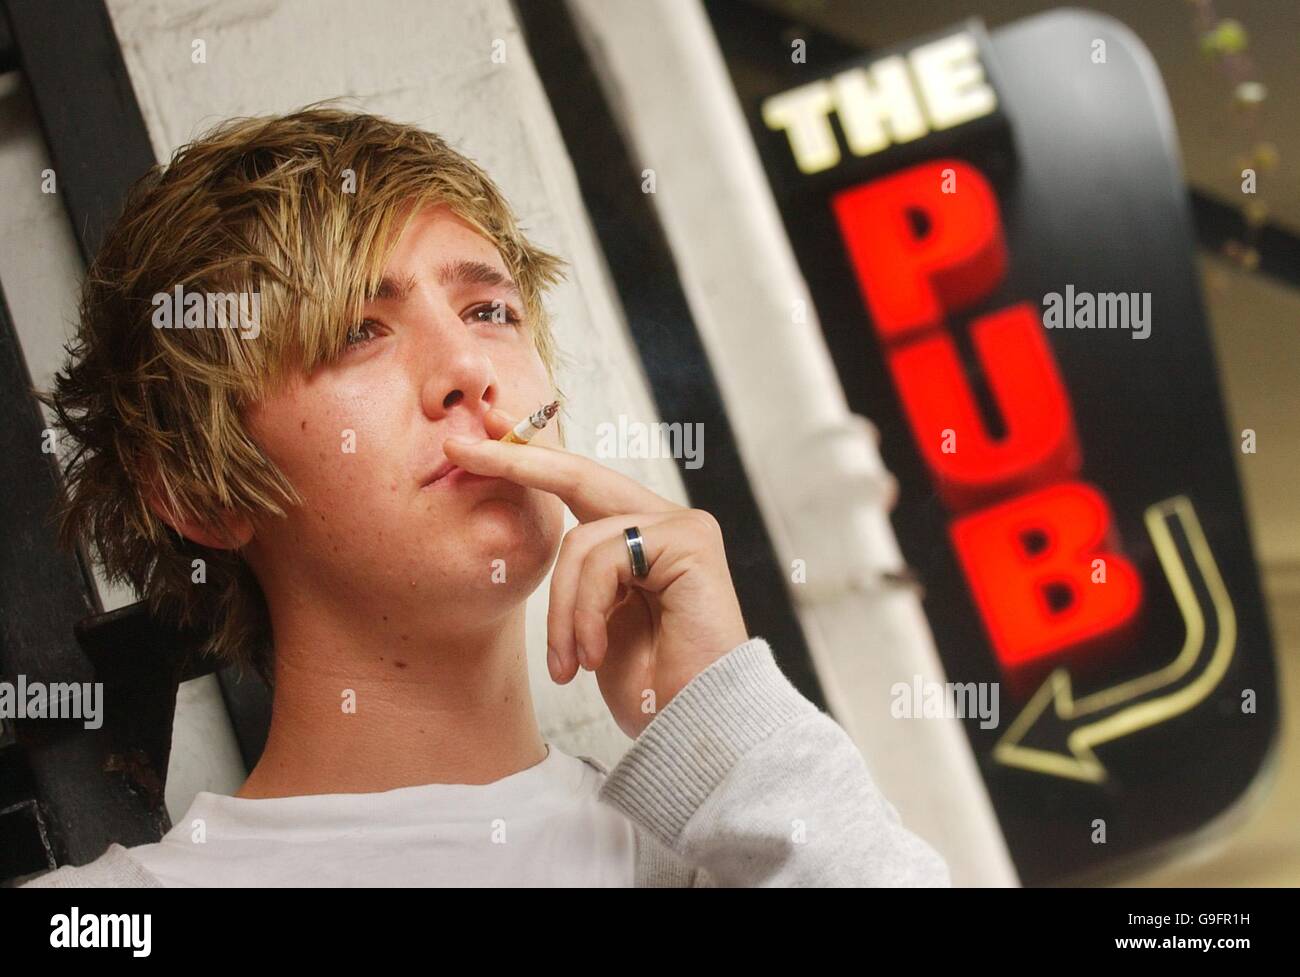 Posed photograph of Stephen Clarke, 19, smoking outside The Pub on Ashton Lane in Glasgow. Drink sales have dropped by more than 10% since the ban on smoking in public places came into effect in Scotland, pub bosses said today. Stock Photo